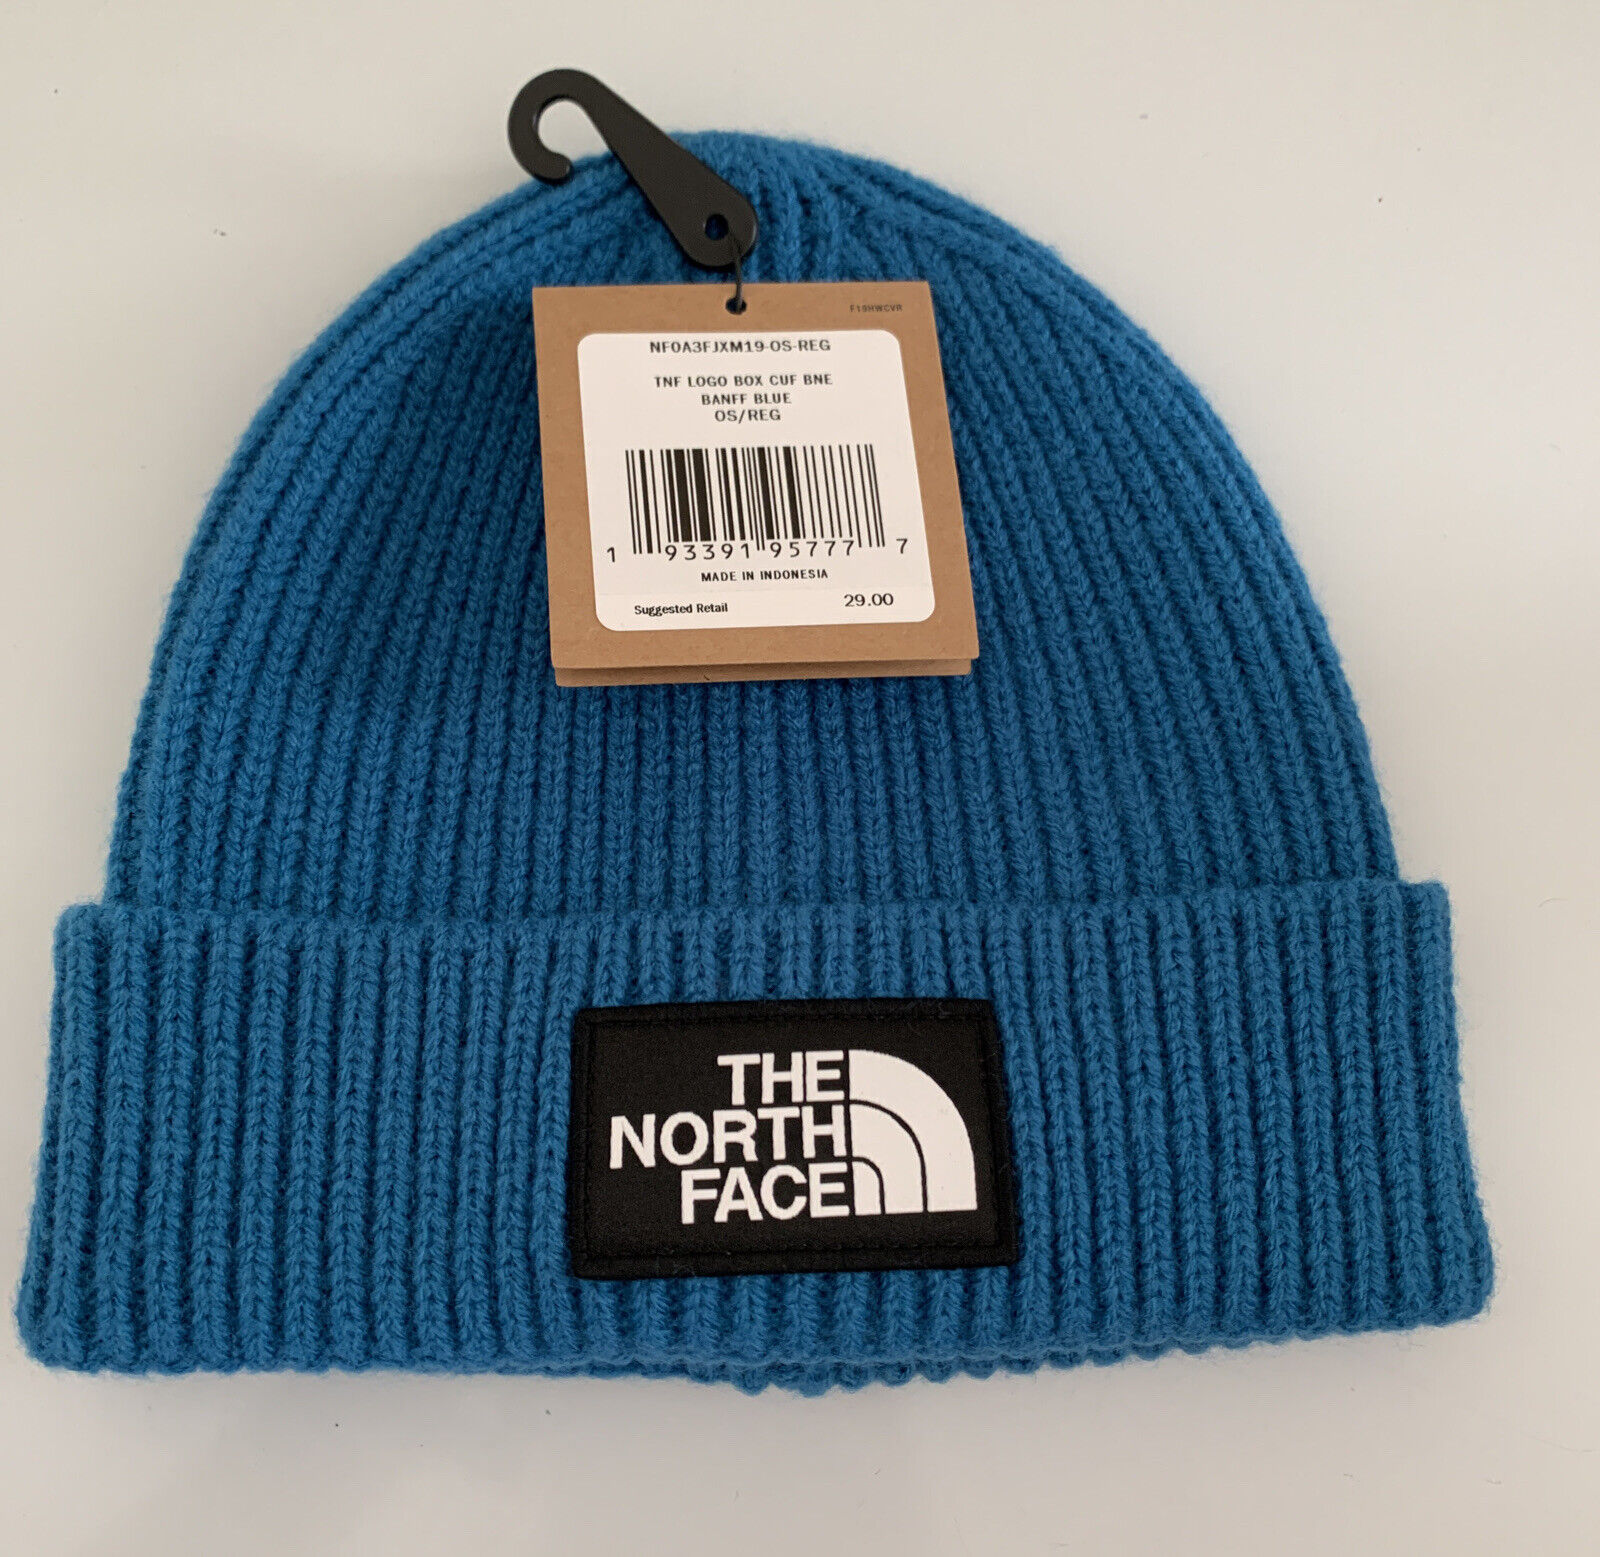 The North Face TNF Logo Box Cuffed Beanie Hat Youth Junior Unisex Blue Size OS The North Face - фотография #4